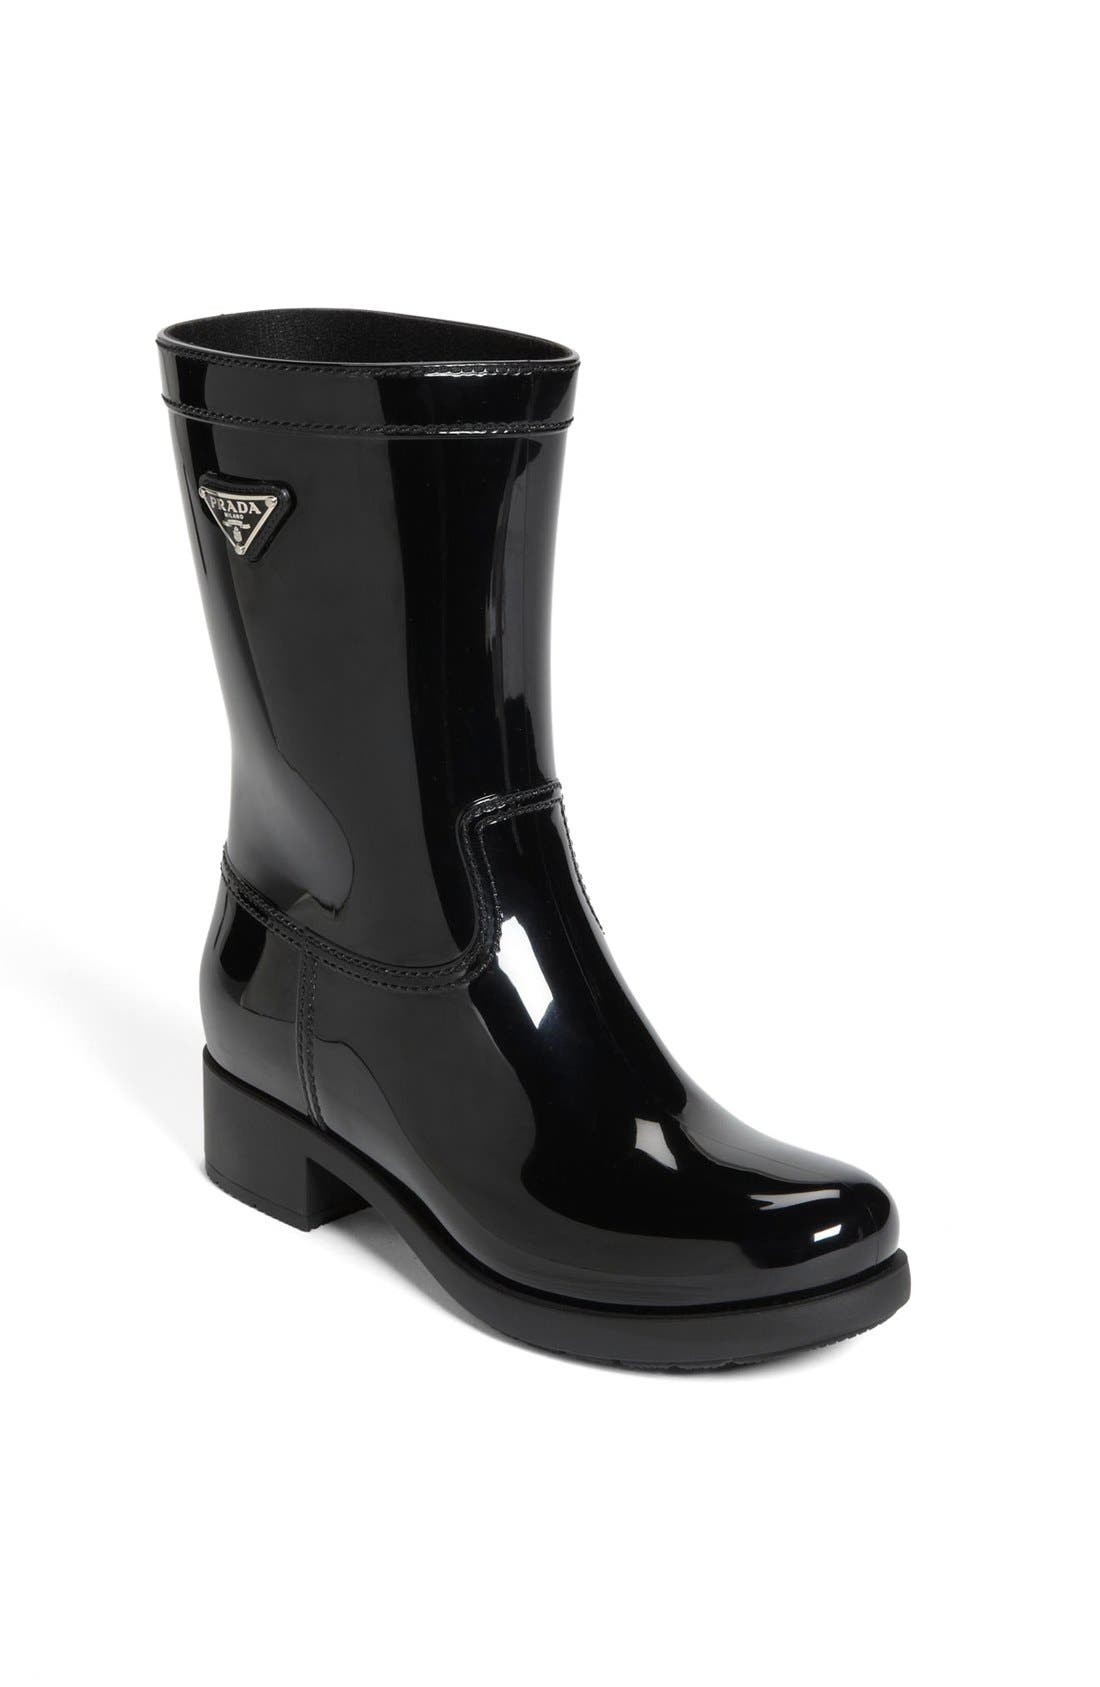 nordstrom rubber boots